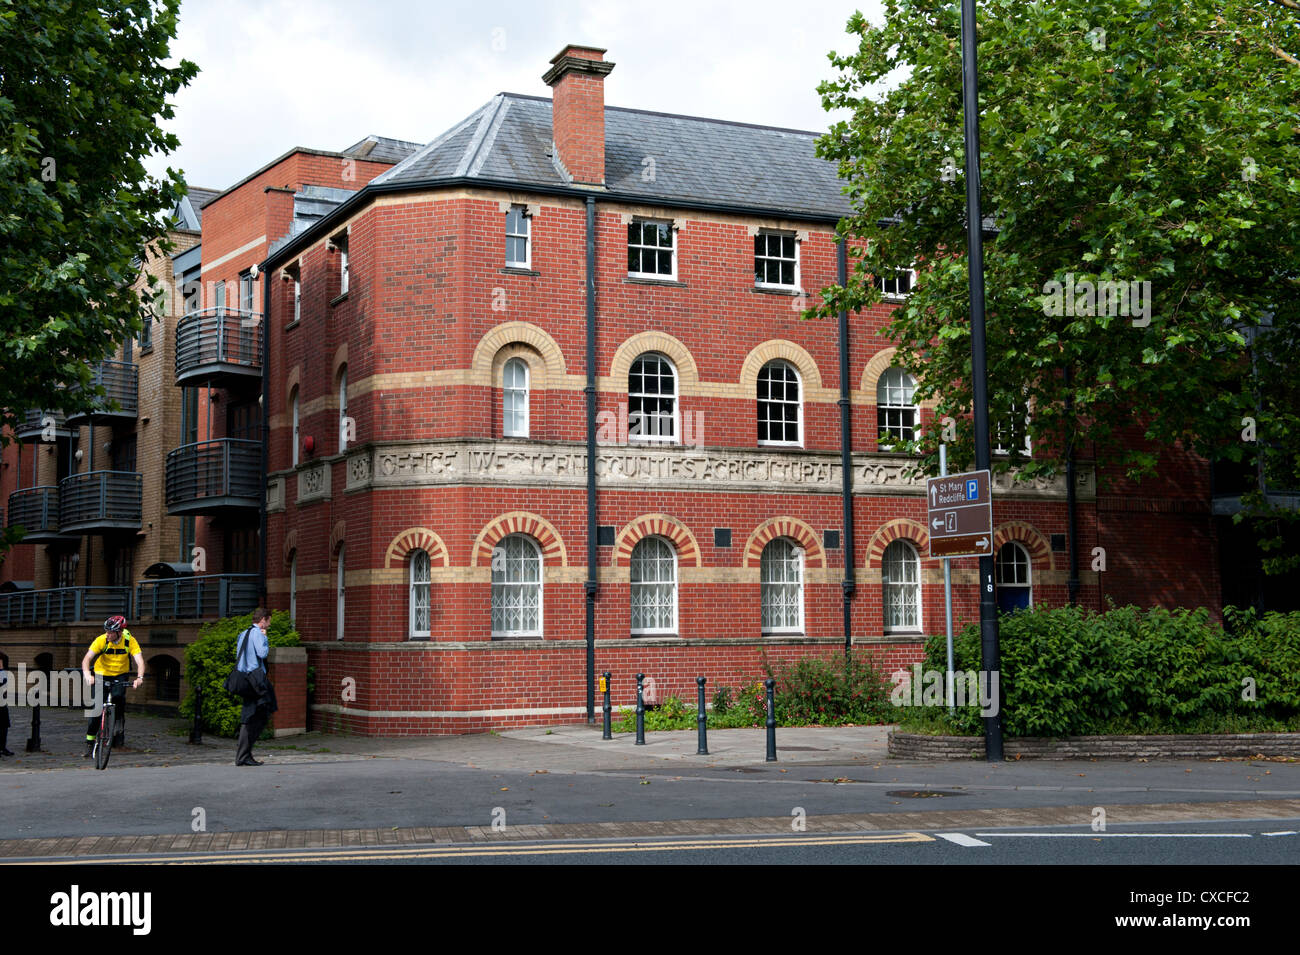 The 1897 Western Counties Agricultural Co-Op building in Bristol, UK Stock Photo